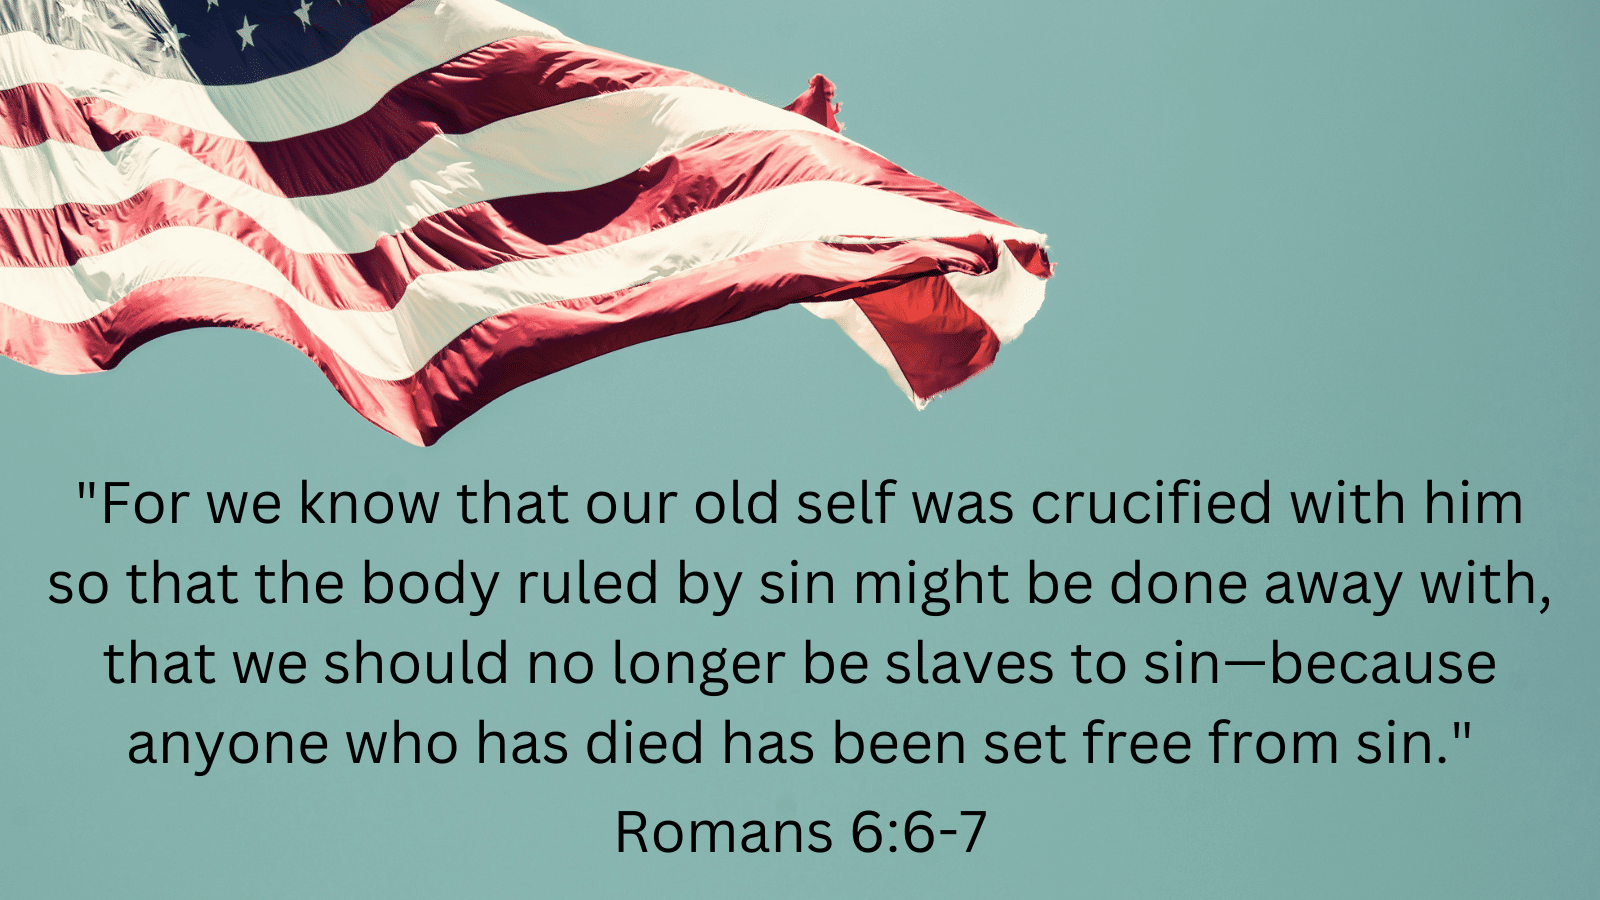 American flag with Romans 6:6-7